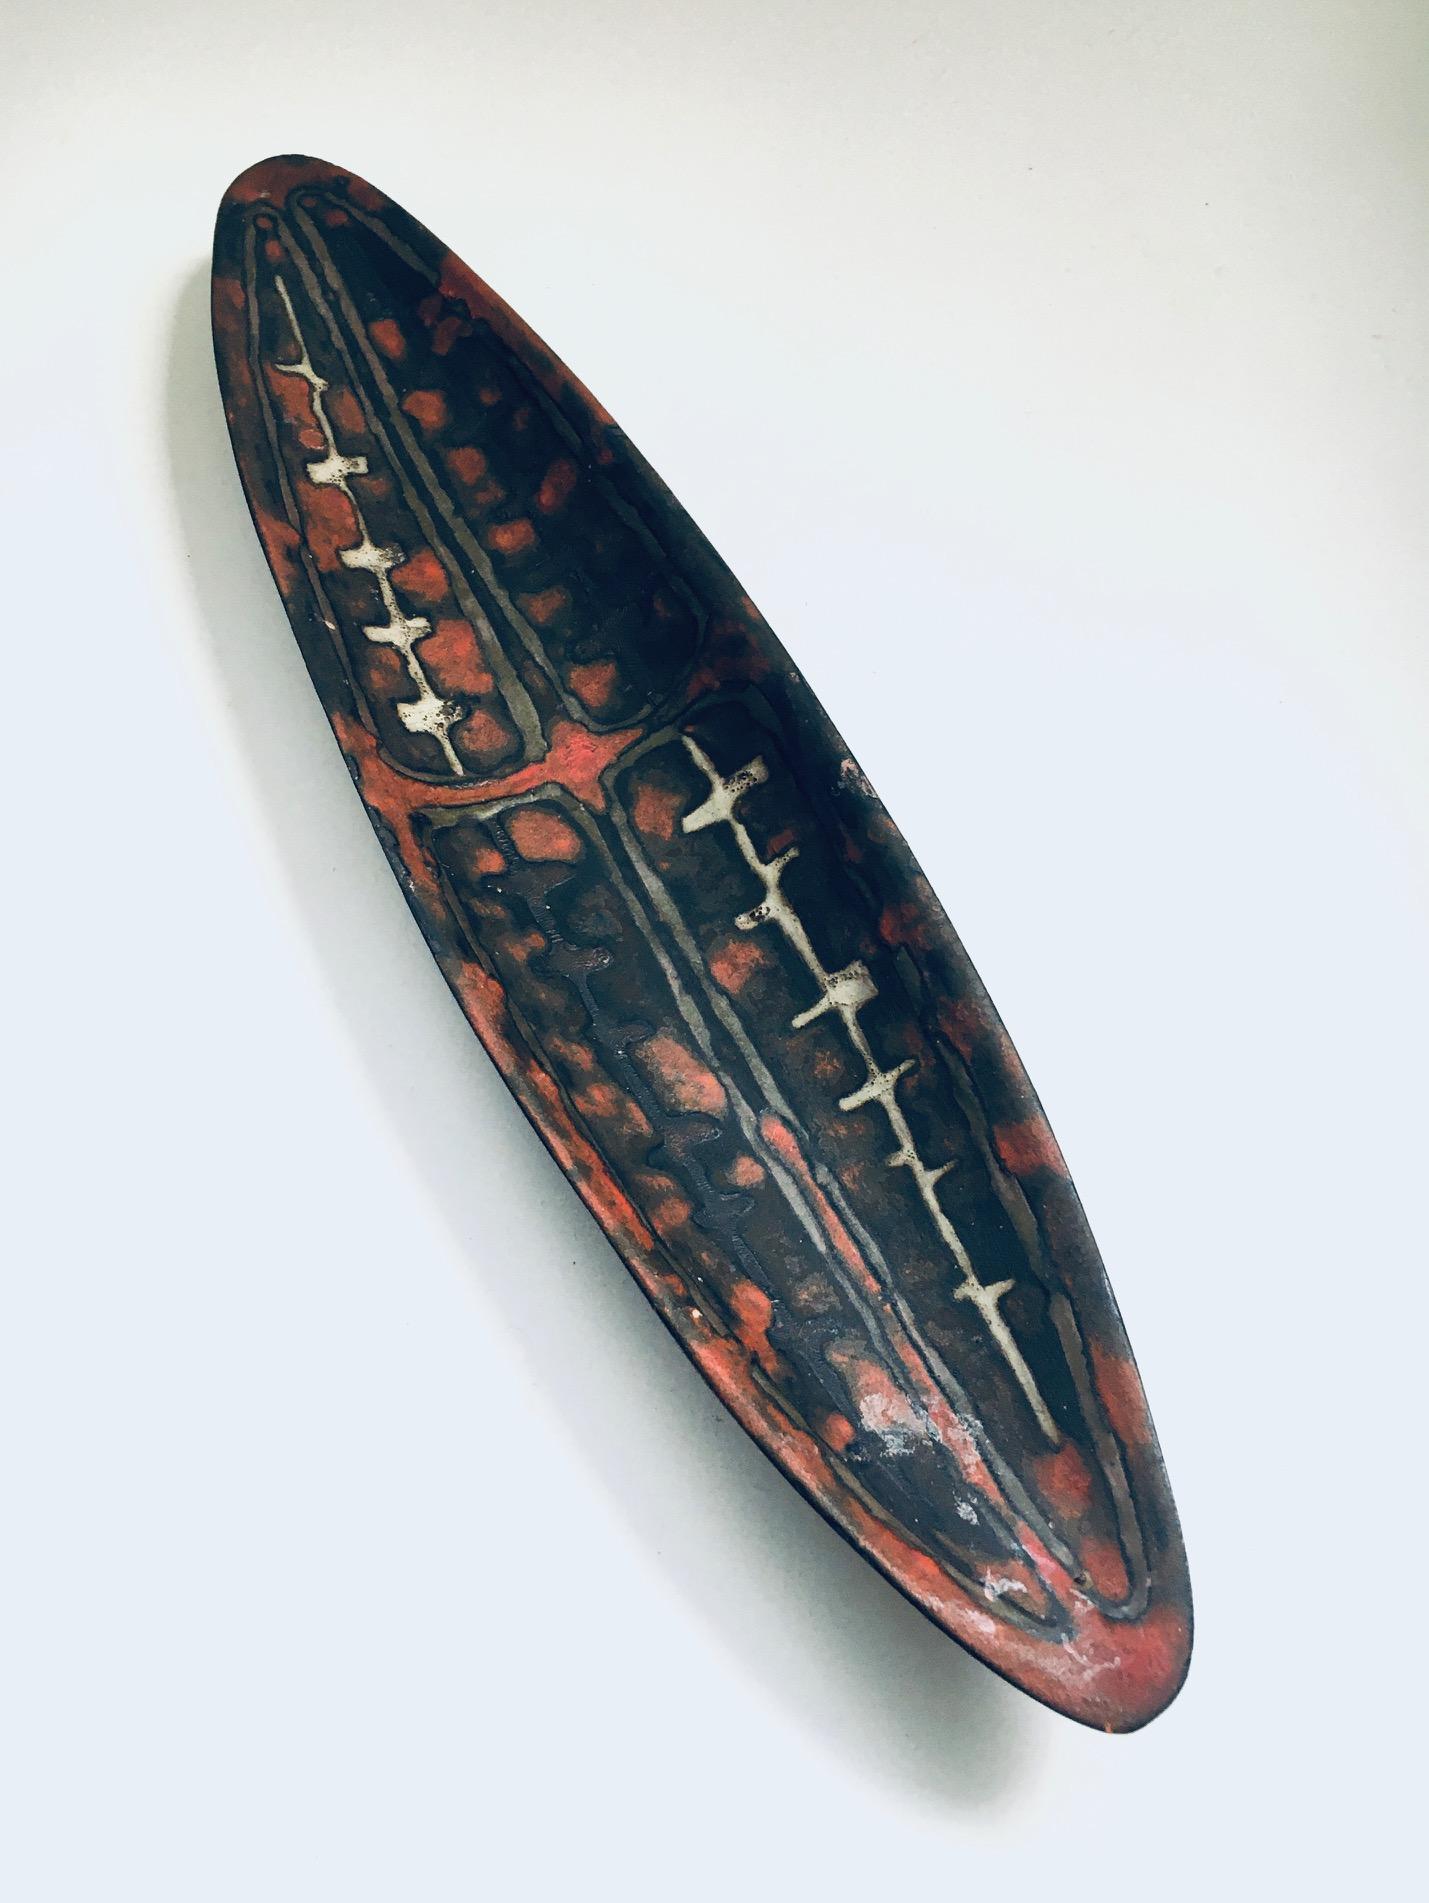 Abstract Art Ceramic Surfboard Bowl Dish by Perignem Studio, Belgium 1960's For Sale 1